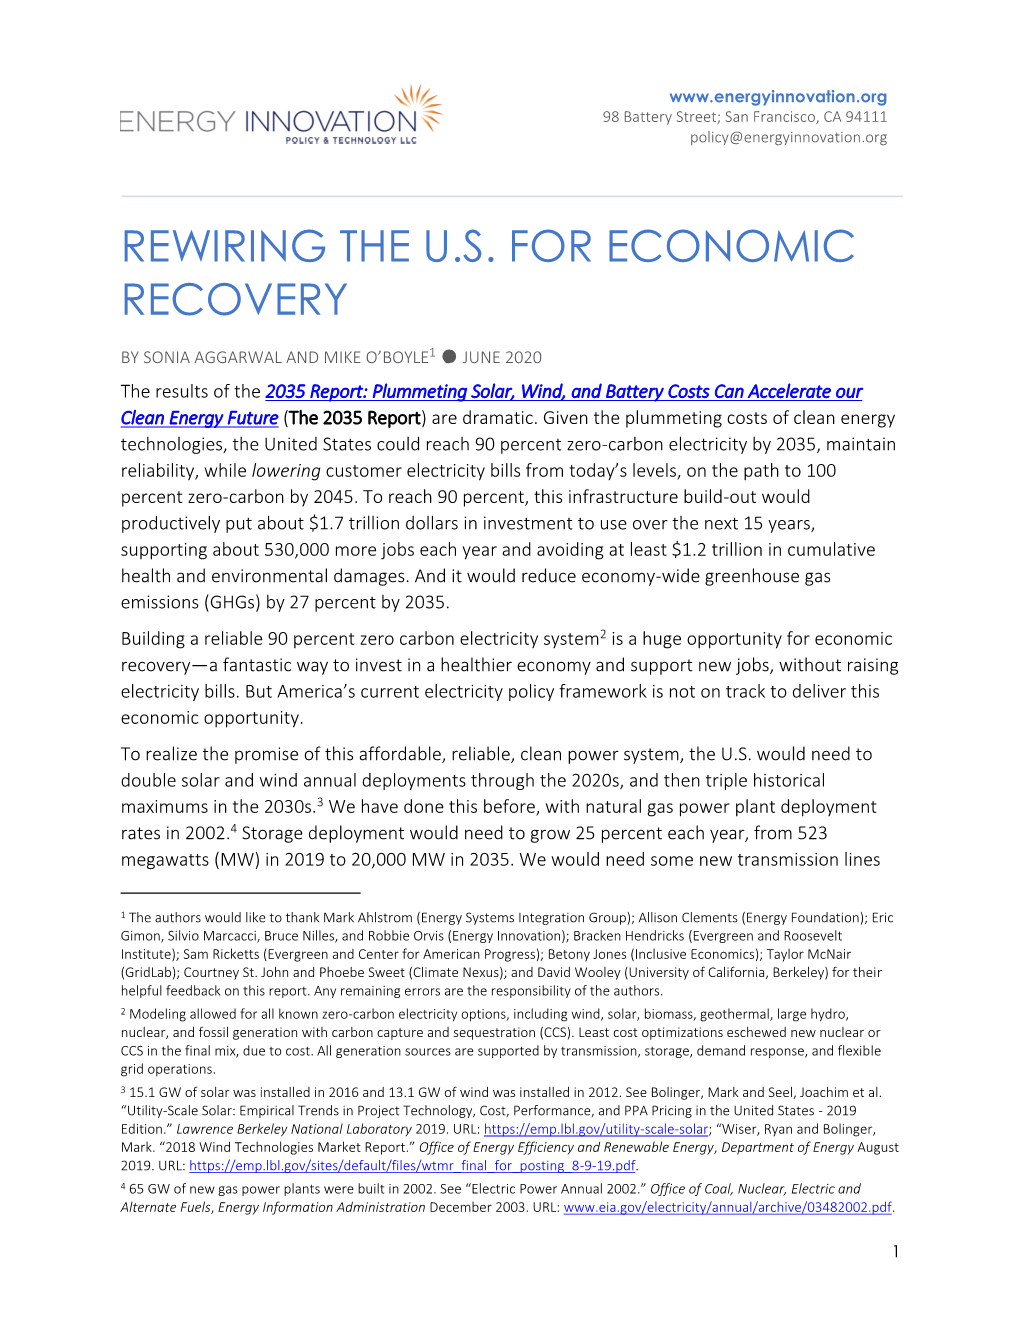 Rewiring the U.S. for Economic Recovery